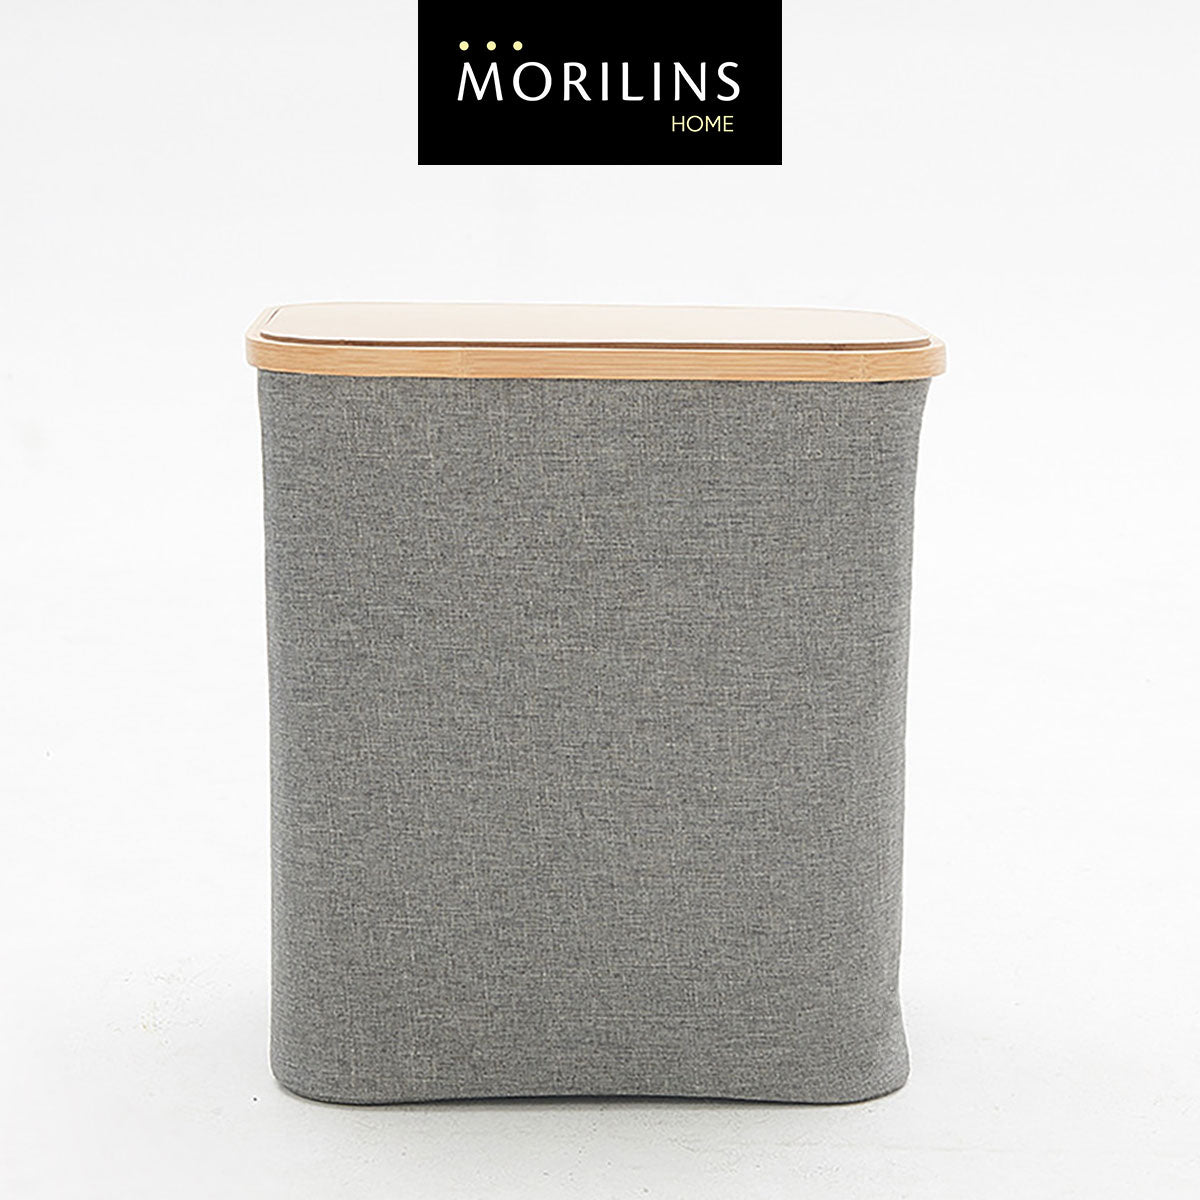 [Morilins Home] Japan-Inspired Multi-Function Tweed Fabric Storage with Real Bamboo Wood Lid - Perfect for Home, Office, & Bathroom Organization - Bloom Concept